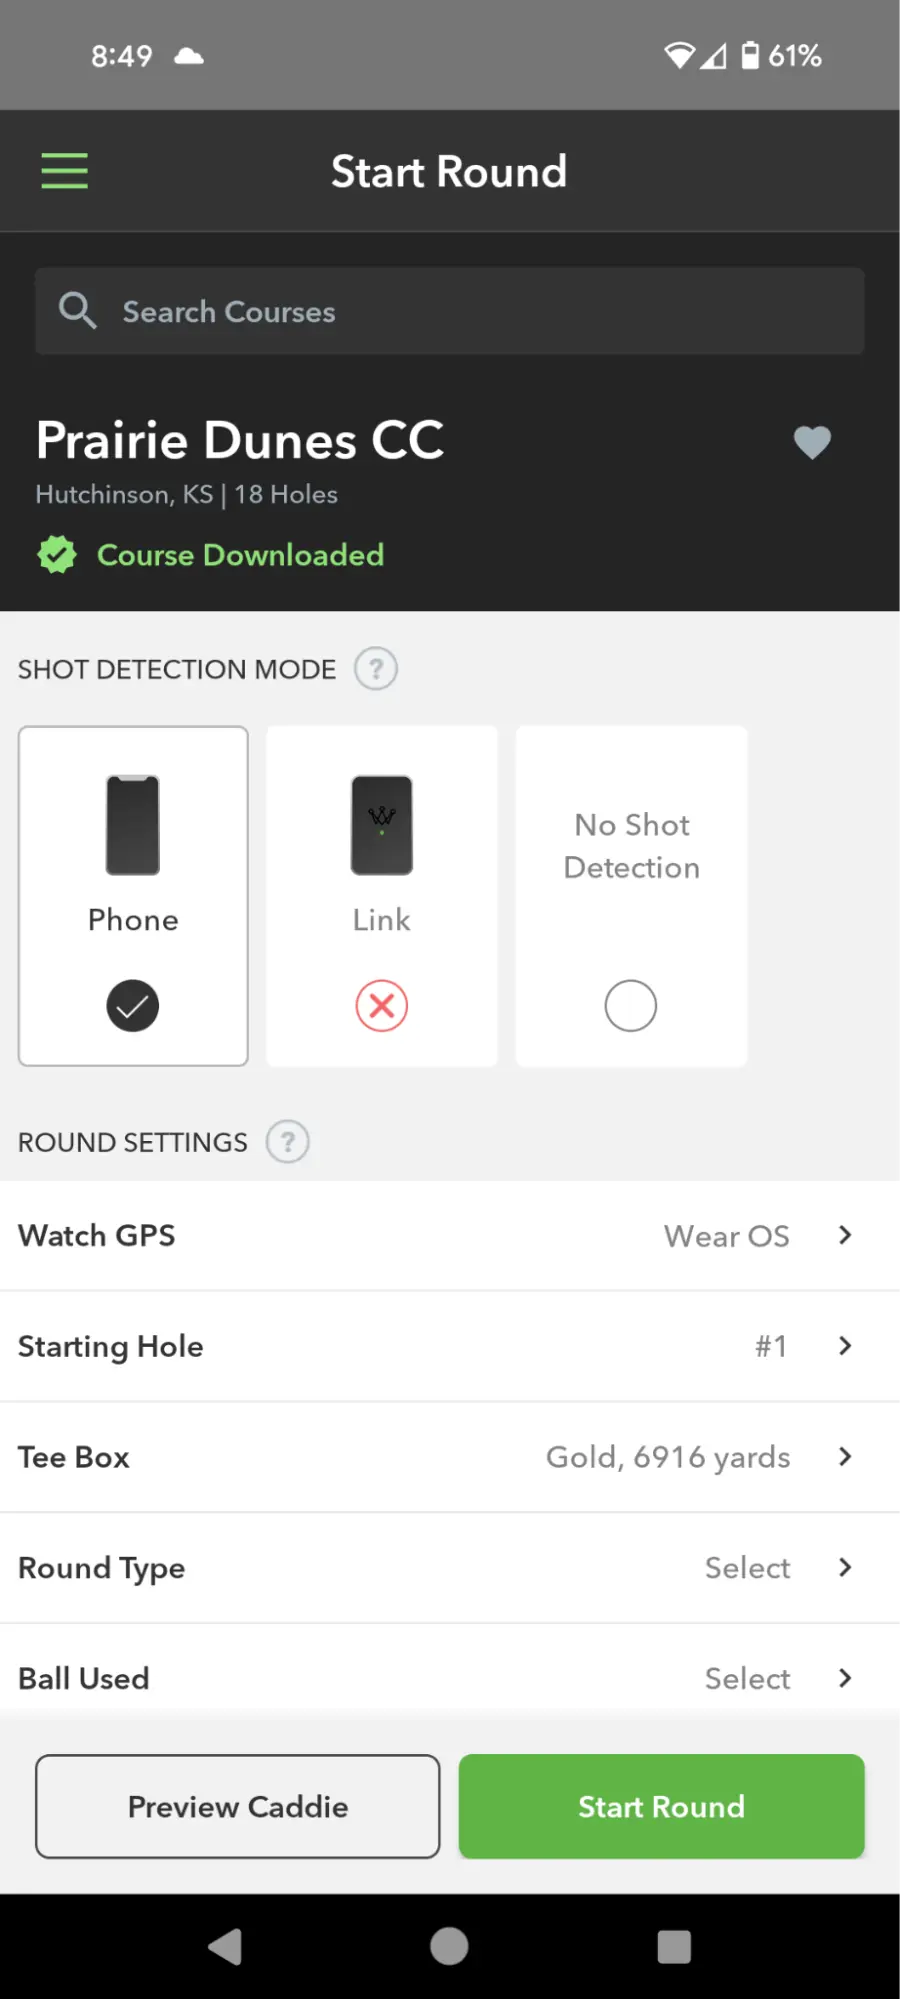 The Arccos app showing several shot detection modes available (Phone & Link)